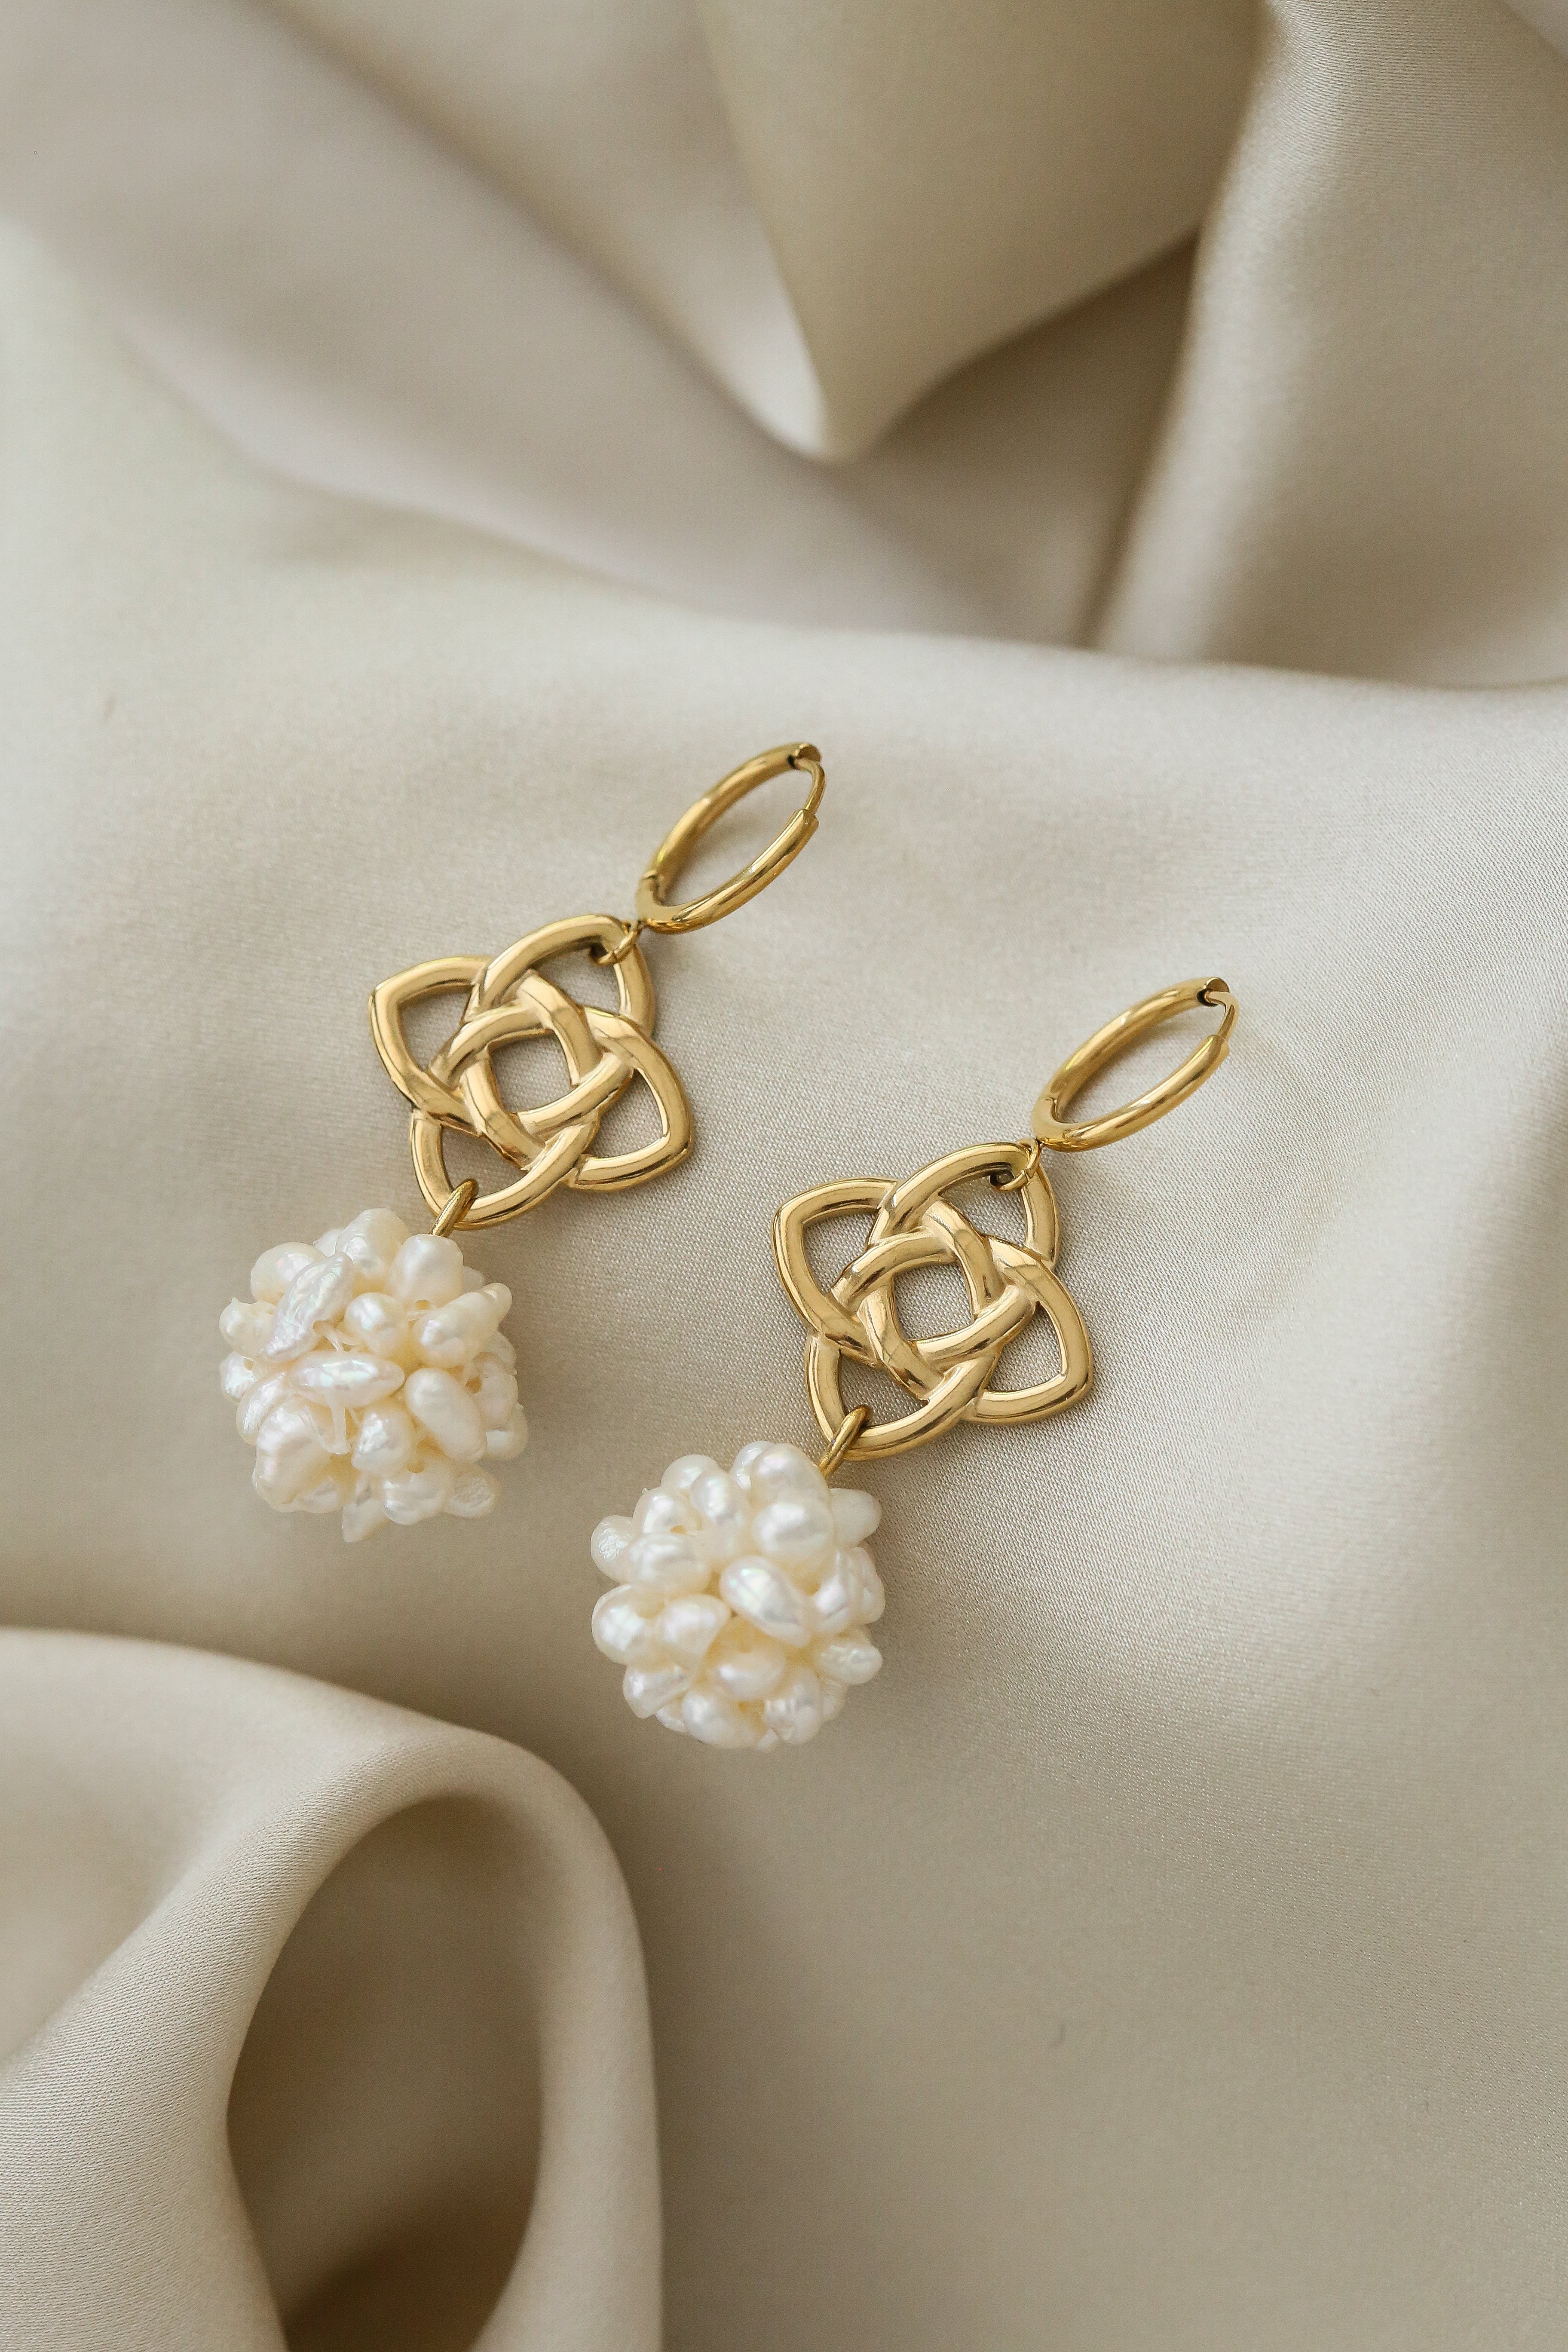 Willow Earrings - Boutique Minimaliste has waterproof, durable, elegant and vintage inspired jewelry